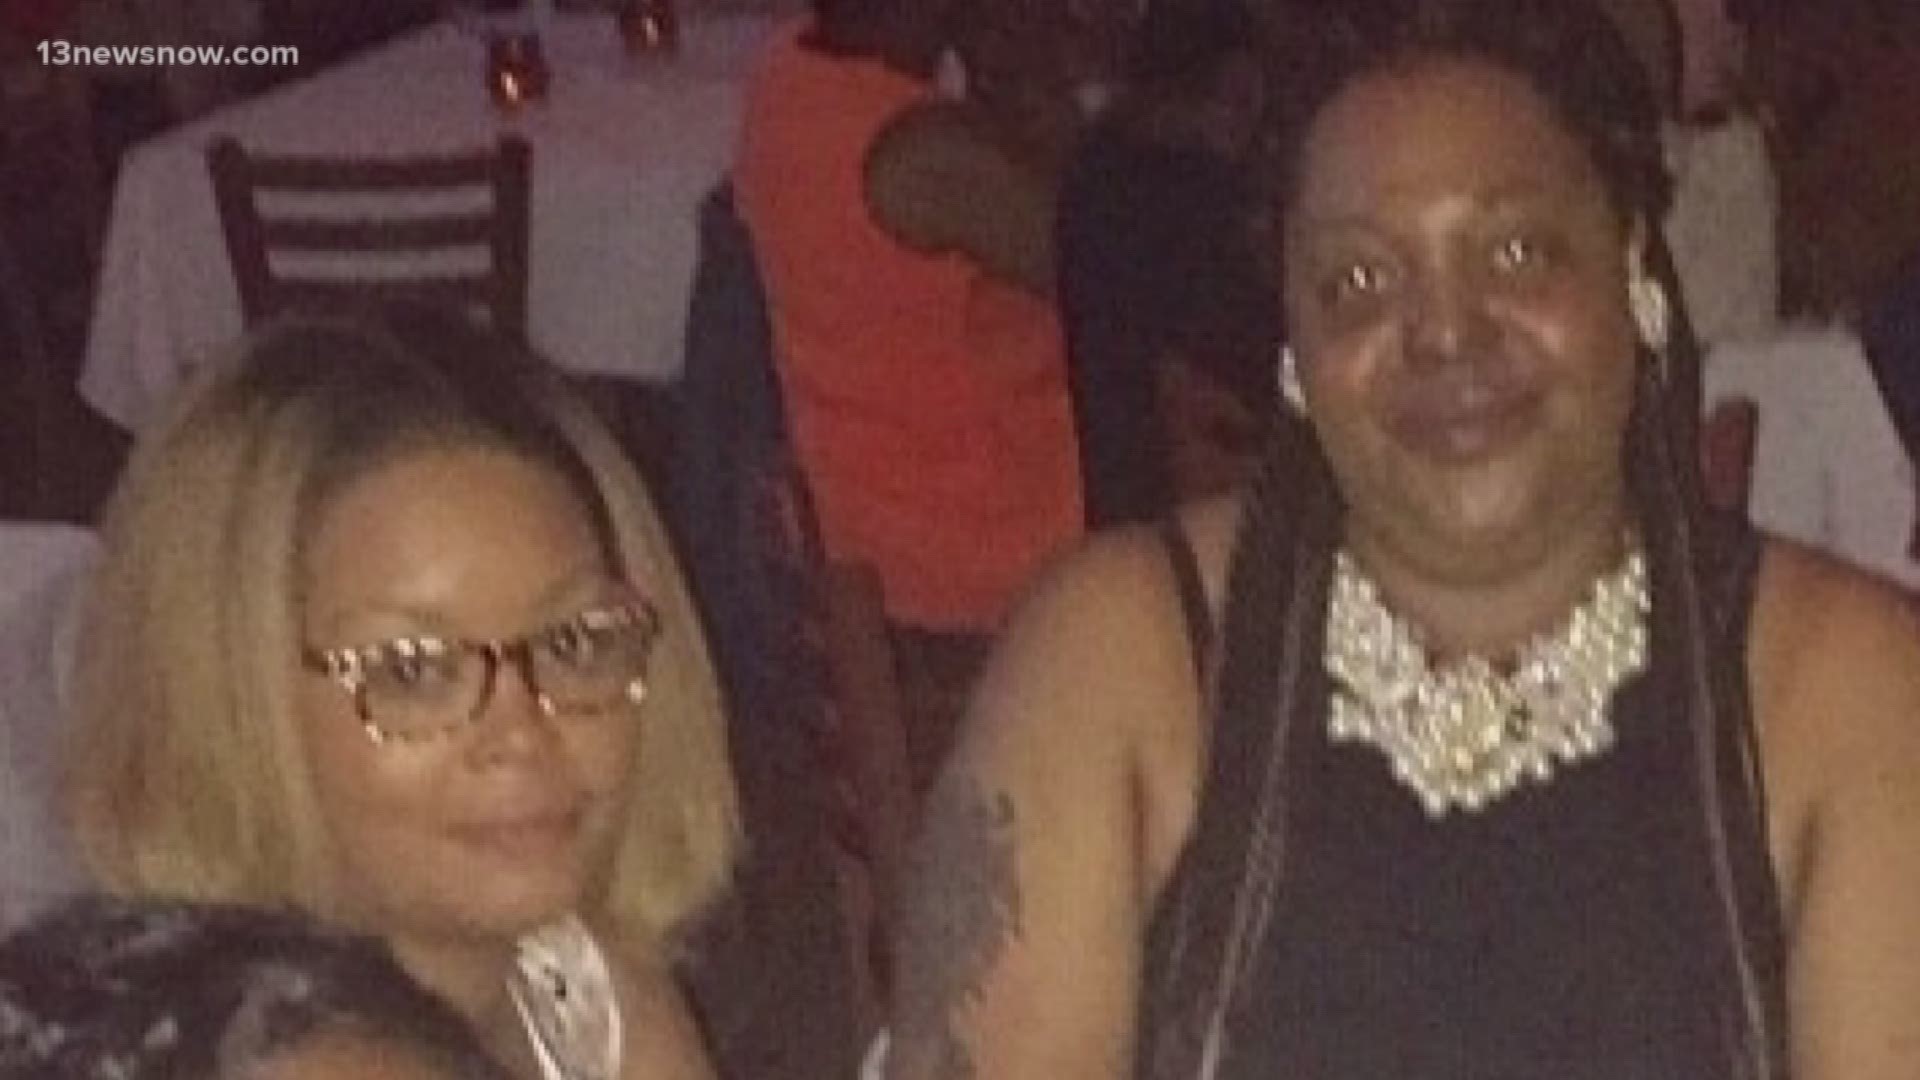 Beatrice Warren-Curtis and Monica Brickhouse met in Norfolk as co-workers. The two eventually became close friends. They were killed in Dayton, Ohio at a mass shooting while Beatrice was visiting Monica who had moved back to Ohio.